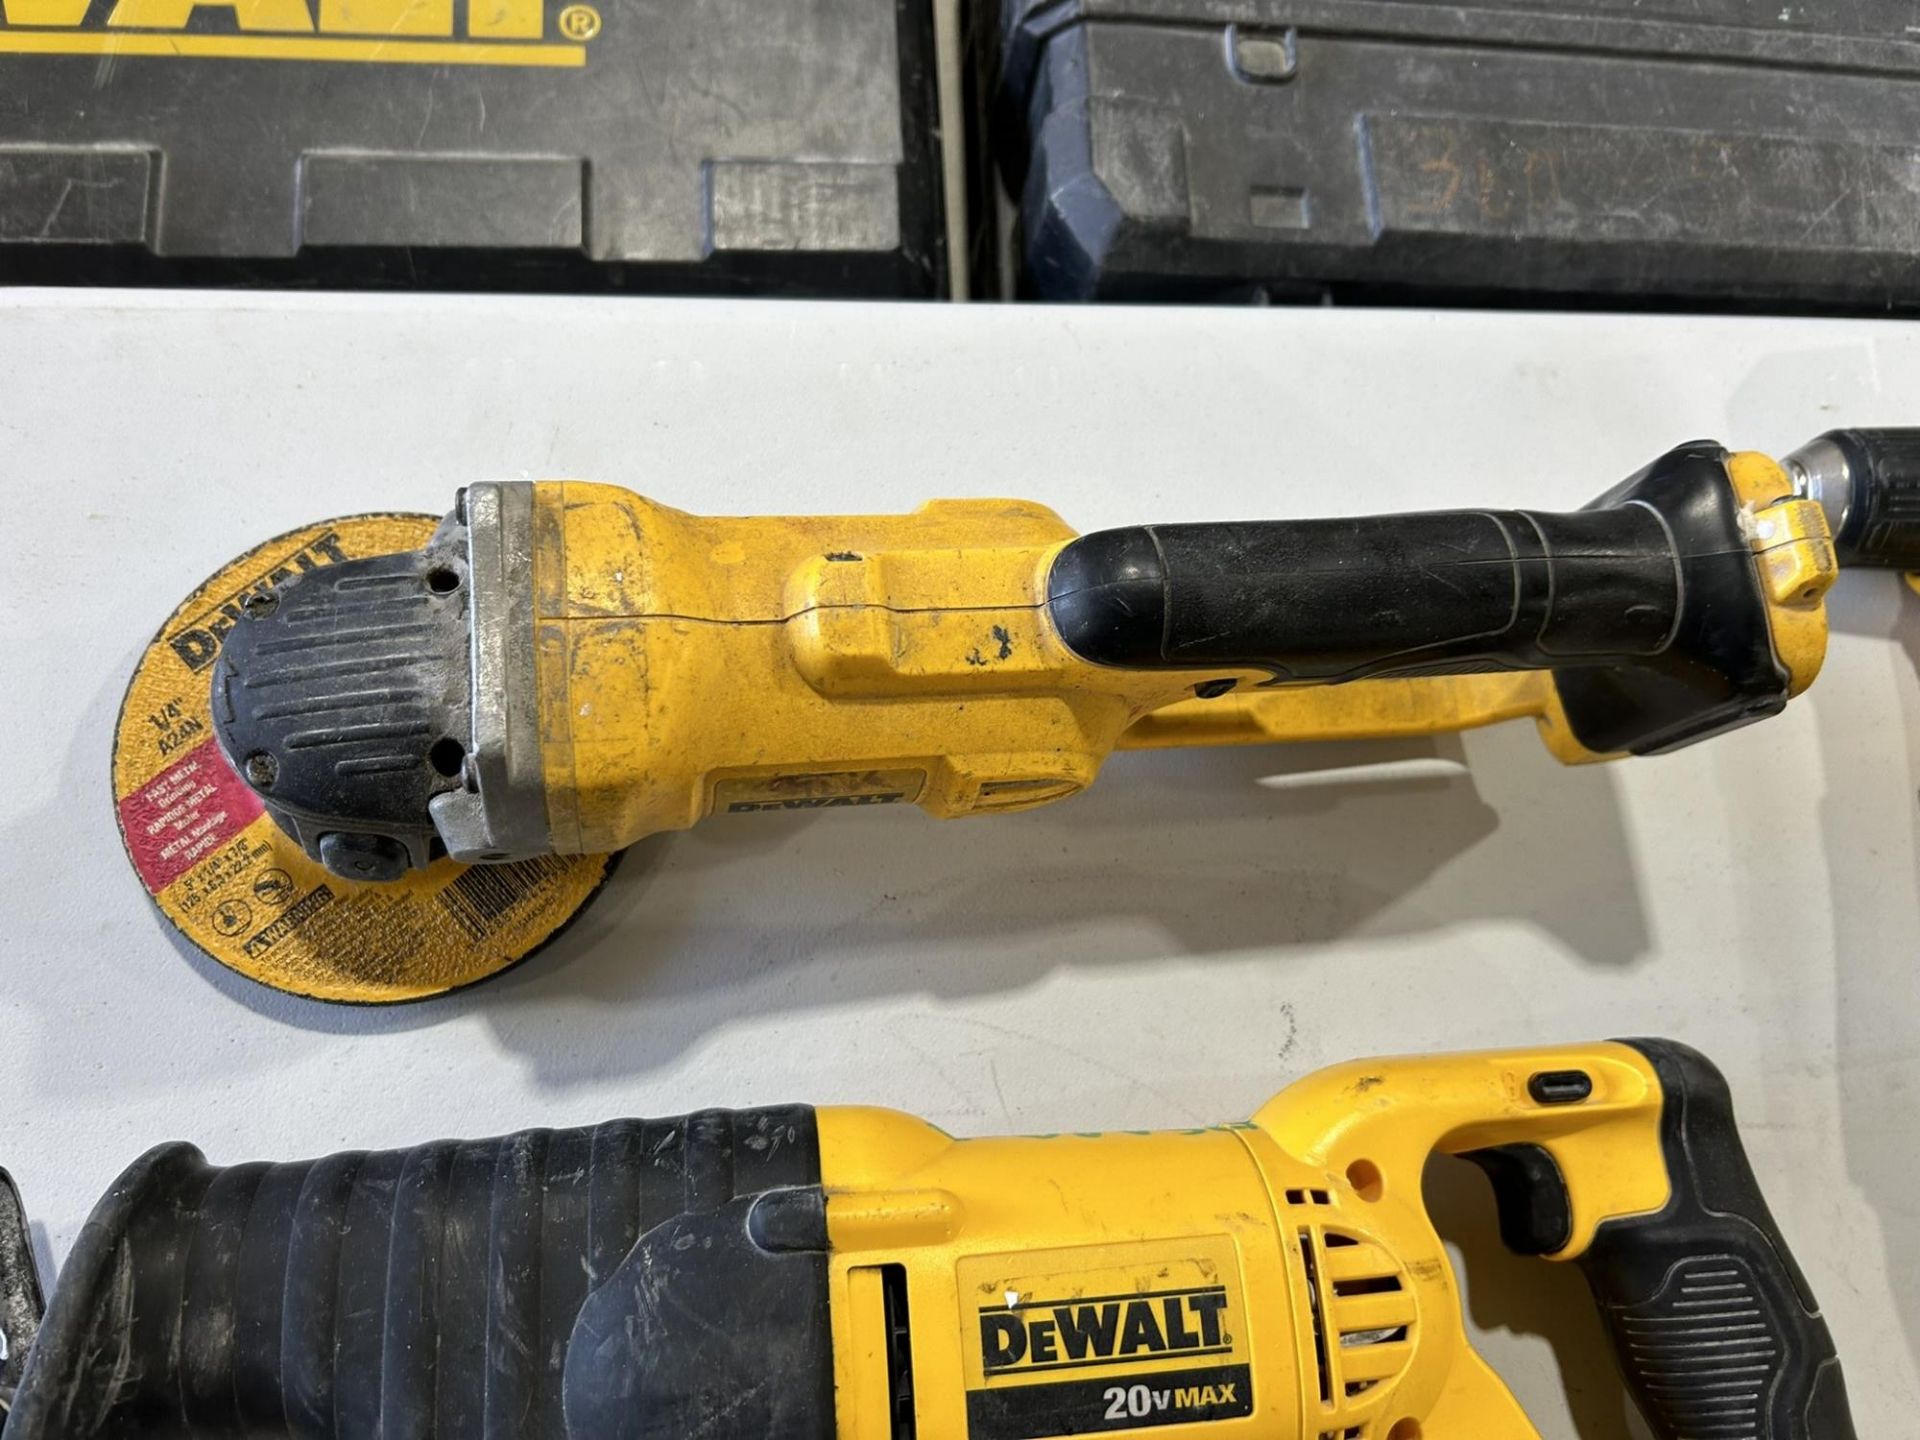 DEWALT CORDLESS RIGHT ANGLE DRILL , RECIPROCATING SAW, ANGLE GRINDER, IMPACT DRIVER, & LIGHT W/ - Image 10 of 11